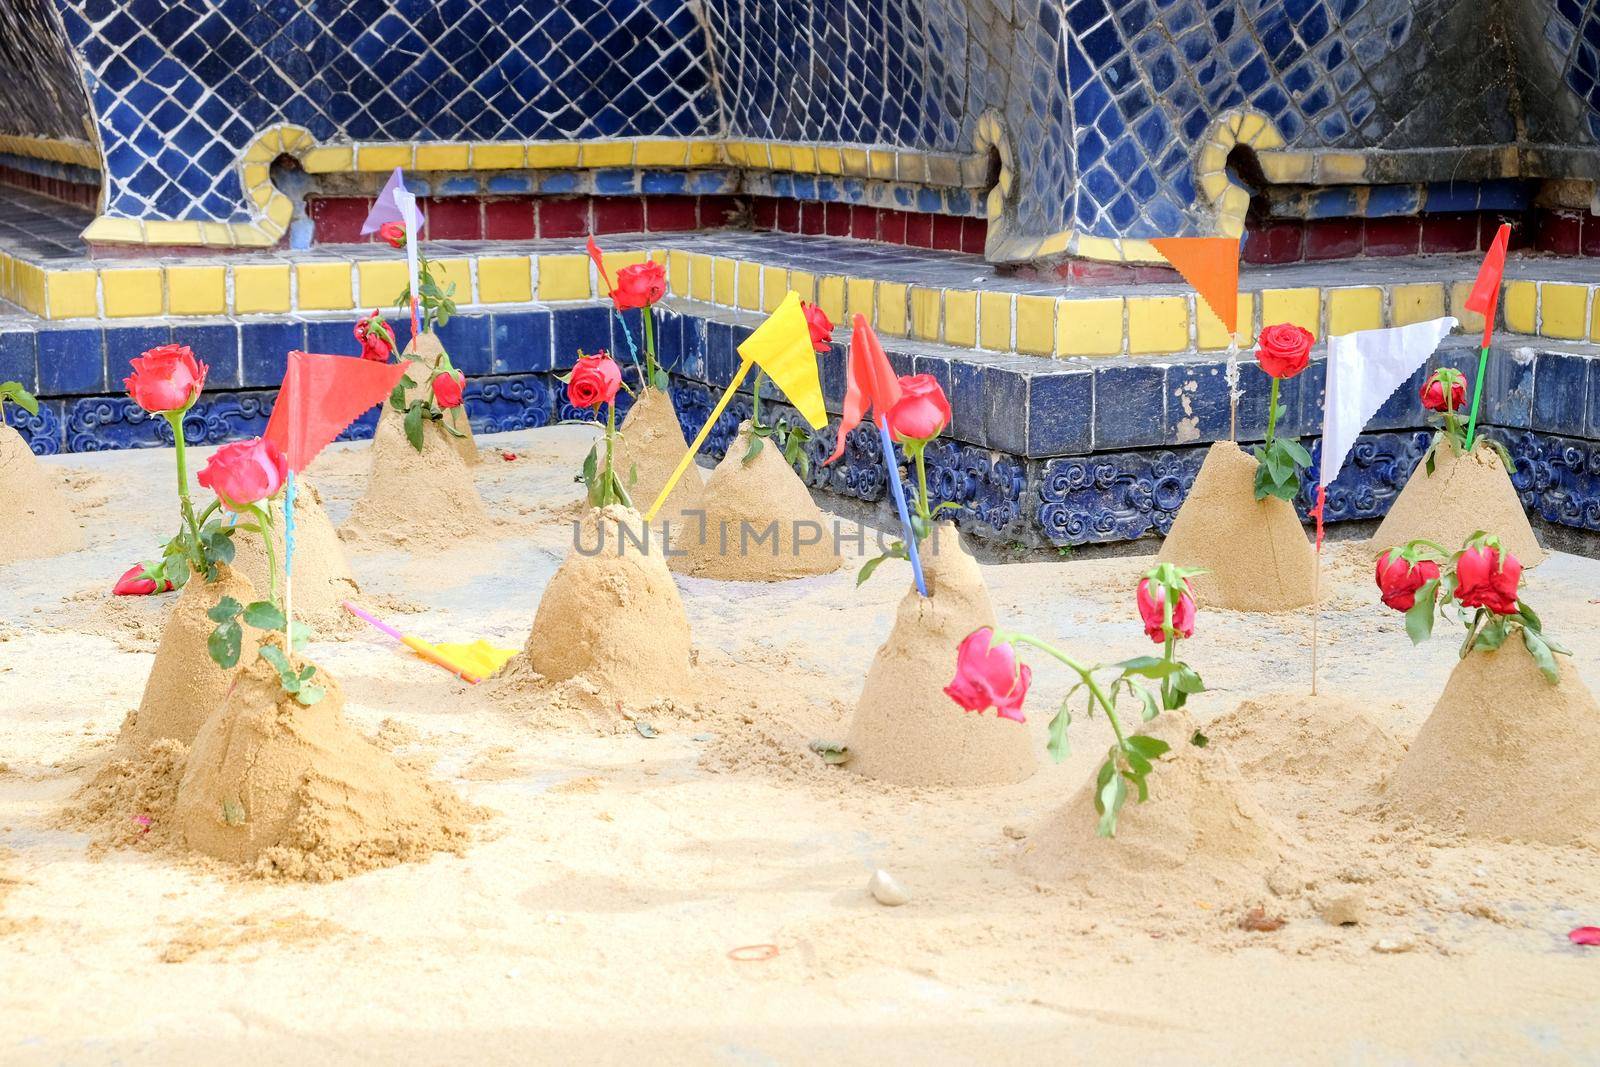 Group of sand pagoda on temple in Songkran Festival, Sand Pagoda is an ancient tradition of the ancient people. And these sand pagodas are also decorated with flags and flowers